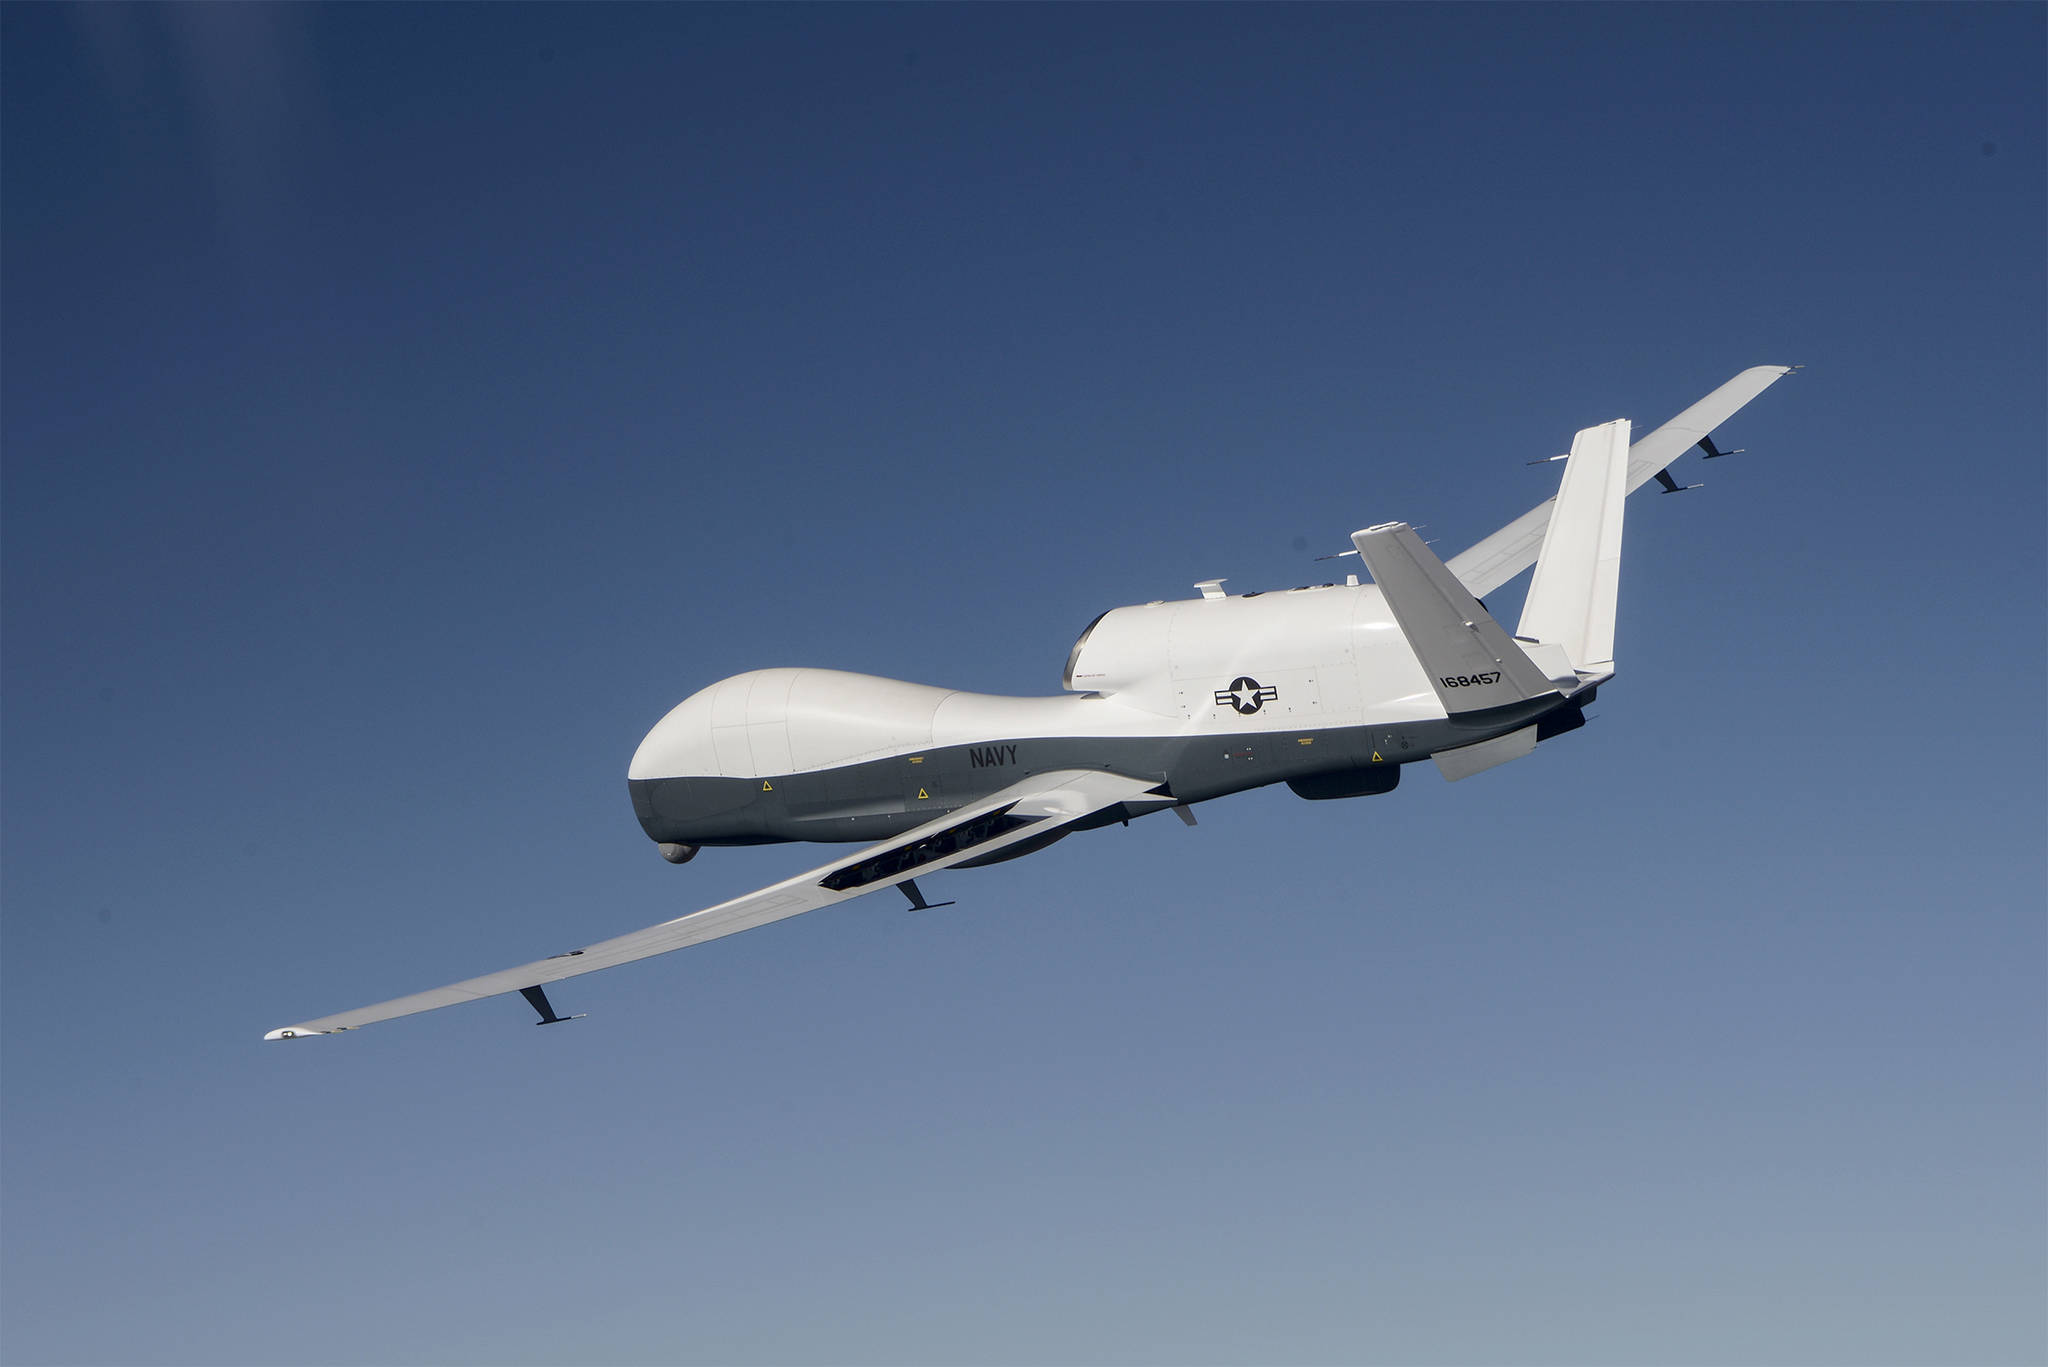 The MQ-4C Triton unmanned aircraft system flies over Edwards Air Force Base, Calif., during a flight test activity in June. Though the Northrop Grumman aircraft won’t be landing at Naval Air Station Whidbey Island, Capt. Matt Arny said its mission will be run from the base. Photo by Alan Radecki.